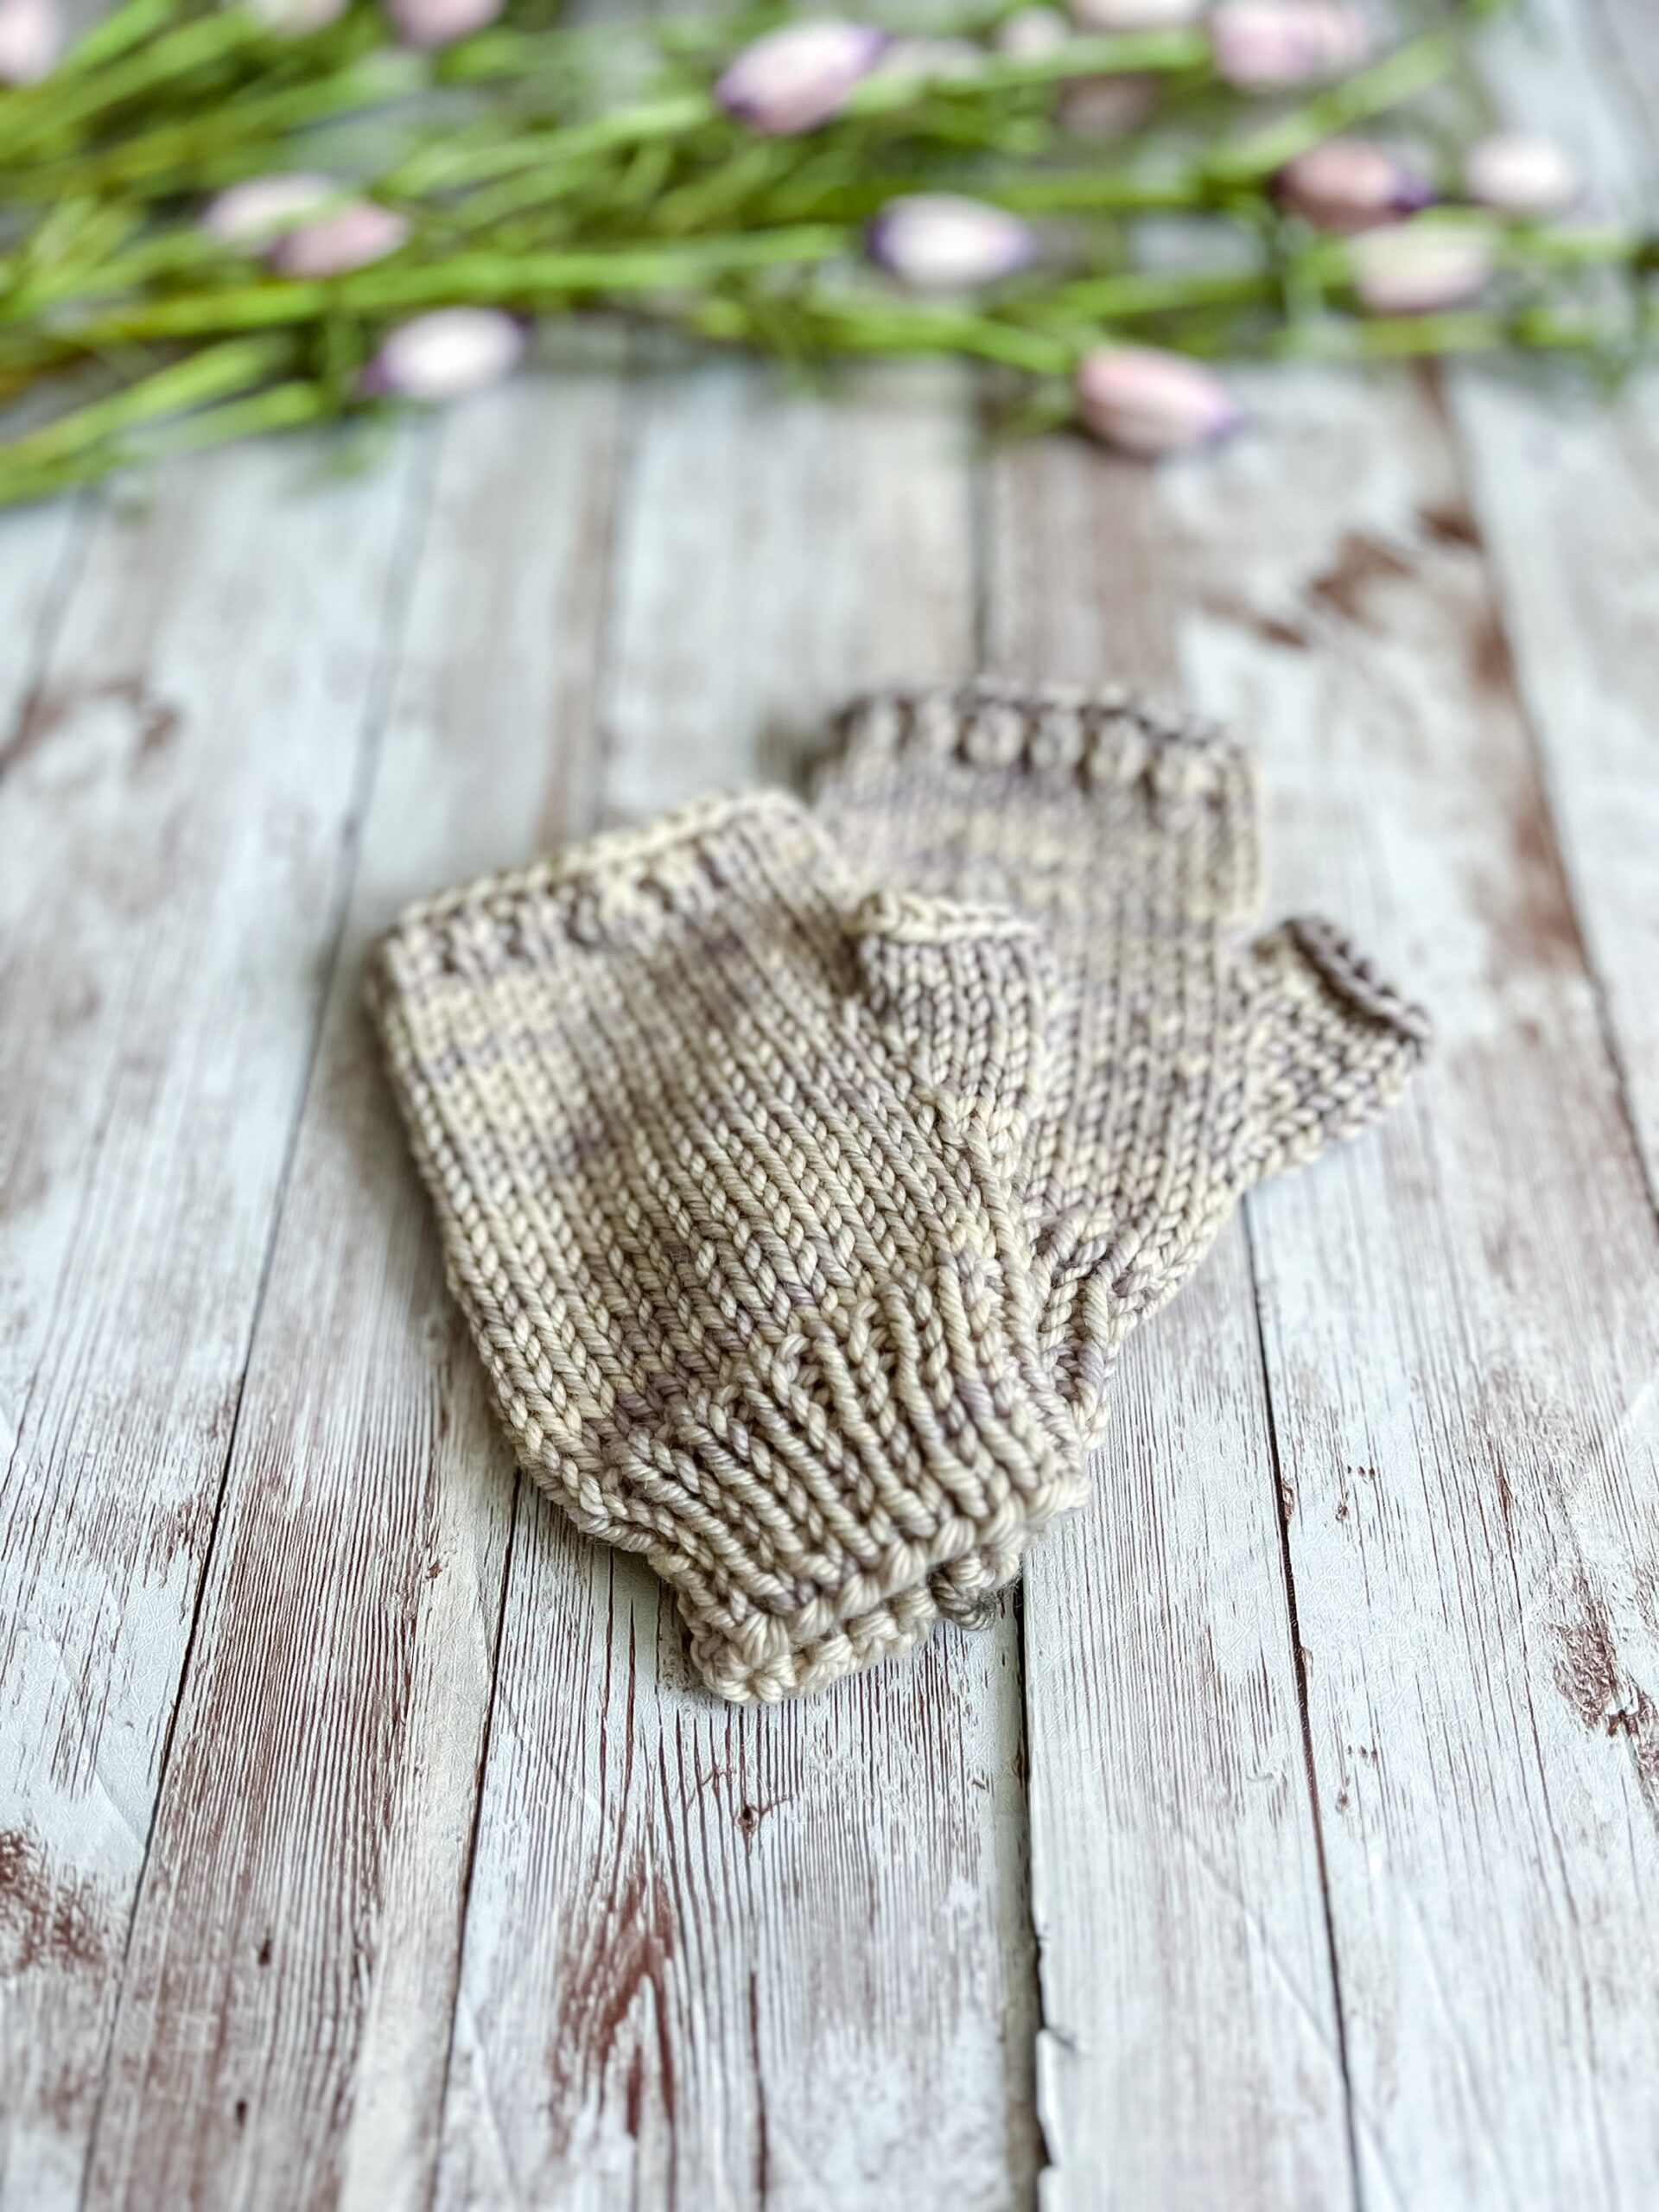 A pair of kid's sized light gray fingerless mitts are displayed on a wood plank with flower buds in the background